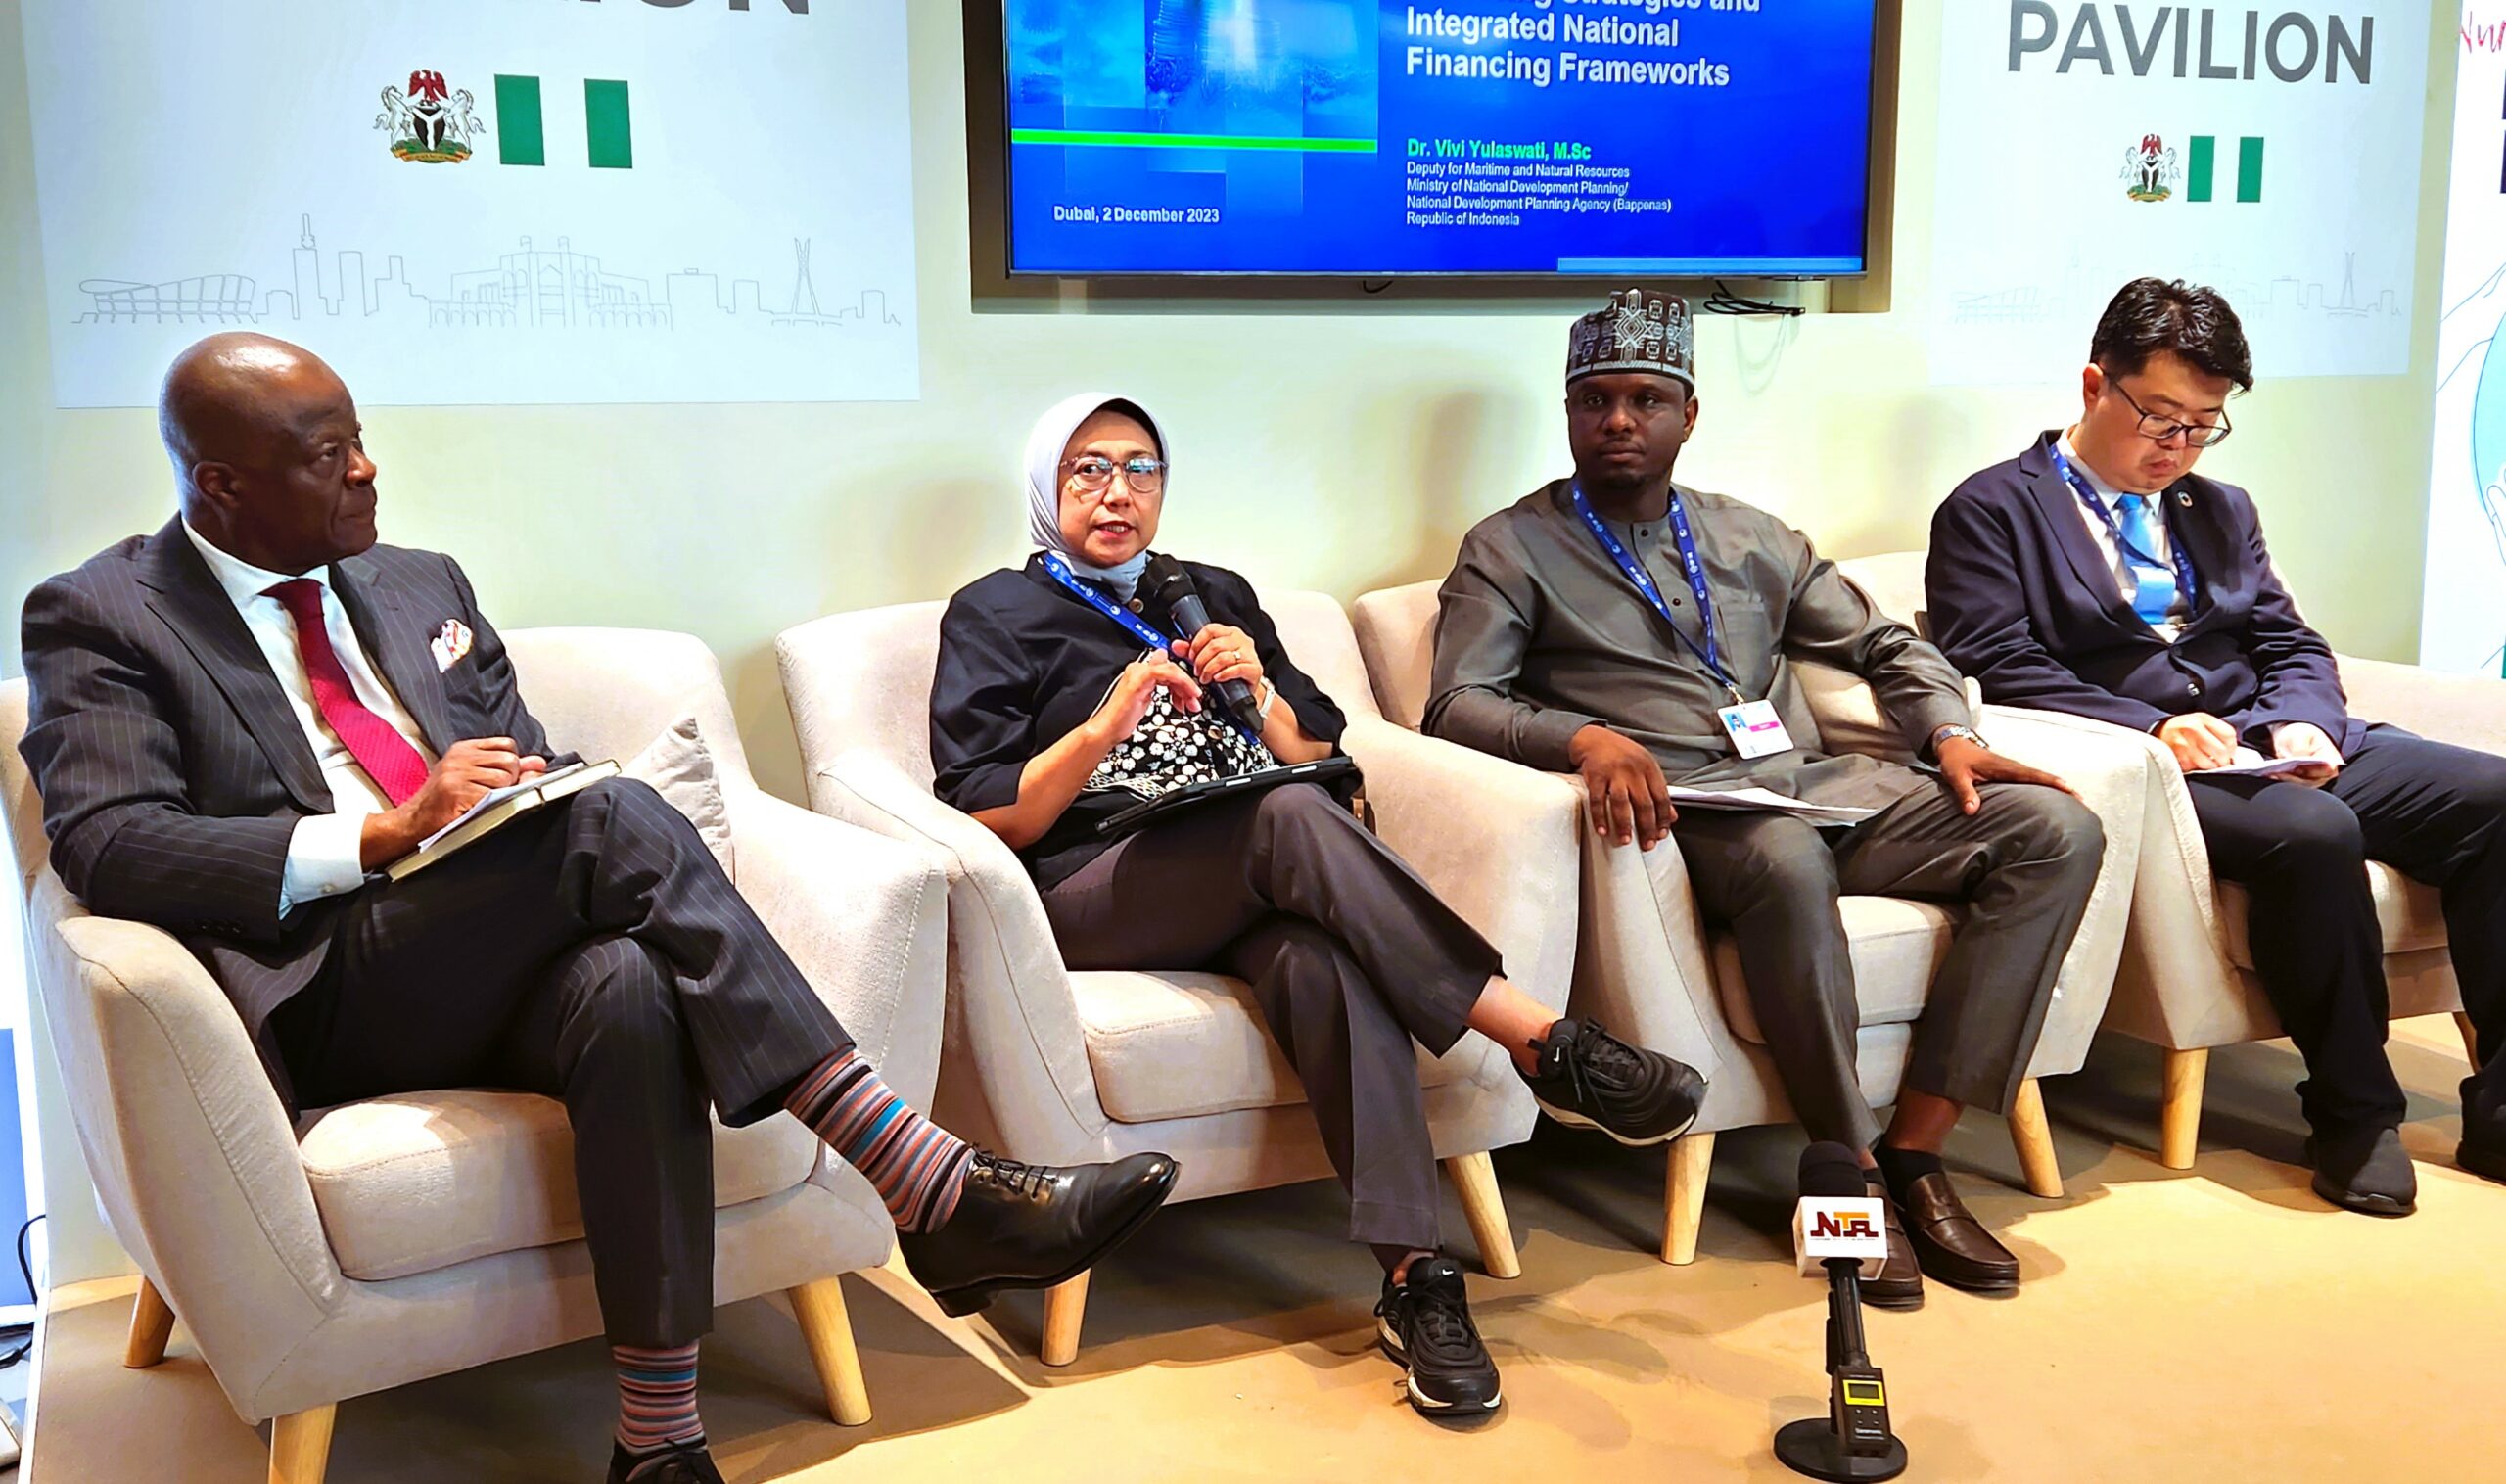 The Panelist: Minister of Finance and Coordinating Minister for the Economy, Mr. Wale Edun, Ms. Vivi Yulaswati, the Deputy Minister on Maritime and Natural Resources/Head of National SDGs Secretariat Ministry of National Development Planning, Ahmad Salihijo of the Rural Electrification Agency of Nigeria and  Mr. Alex Wang, Director Global Committee on social business for SDGs China